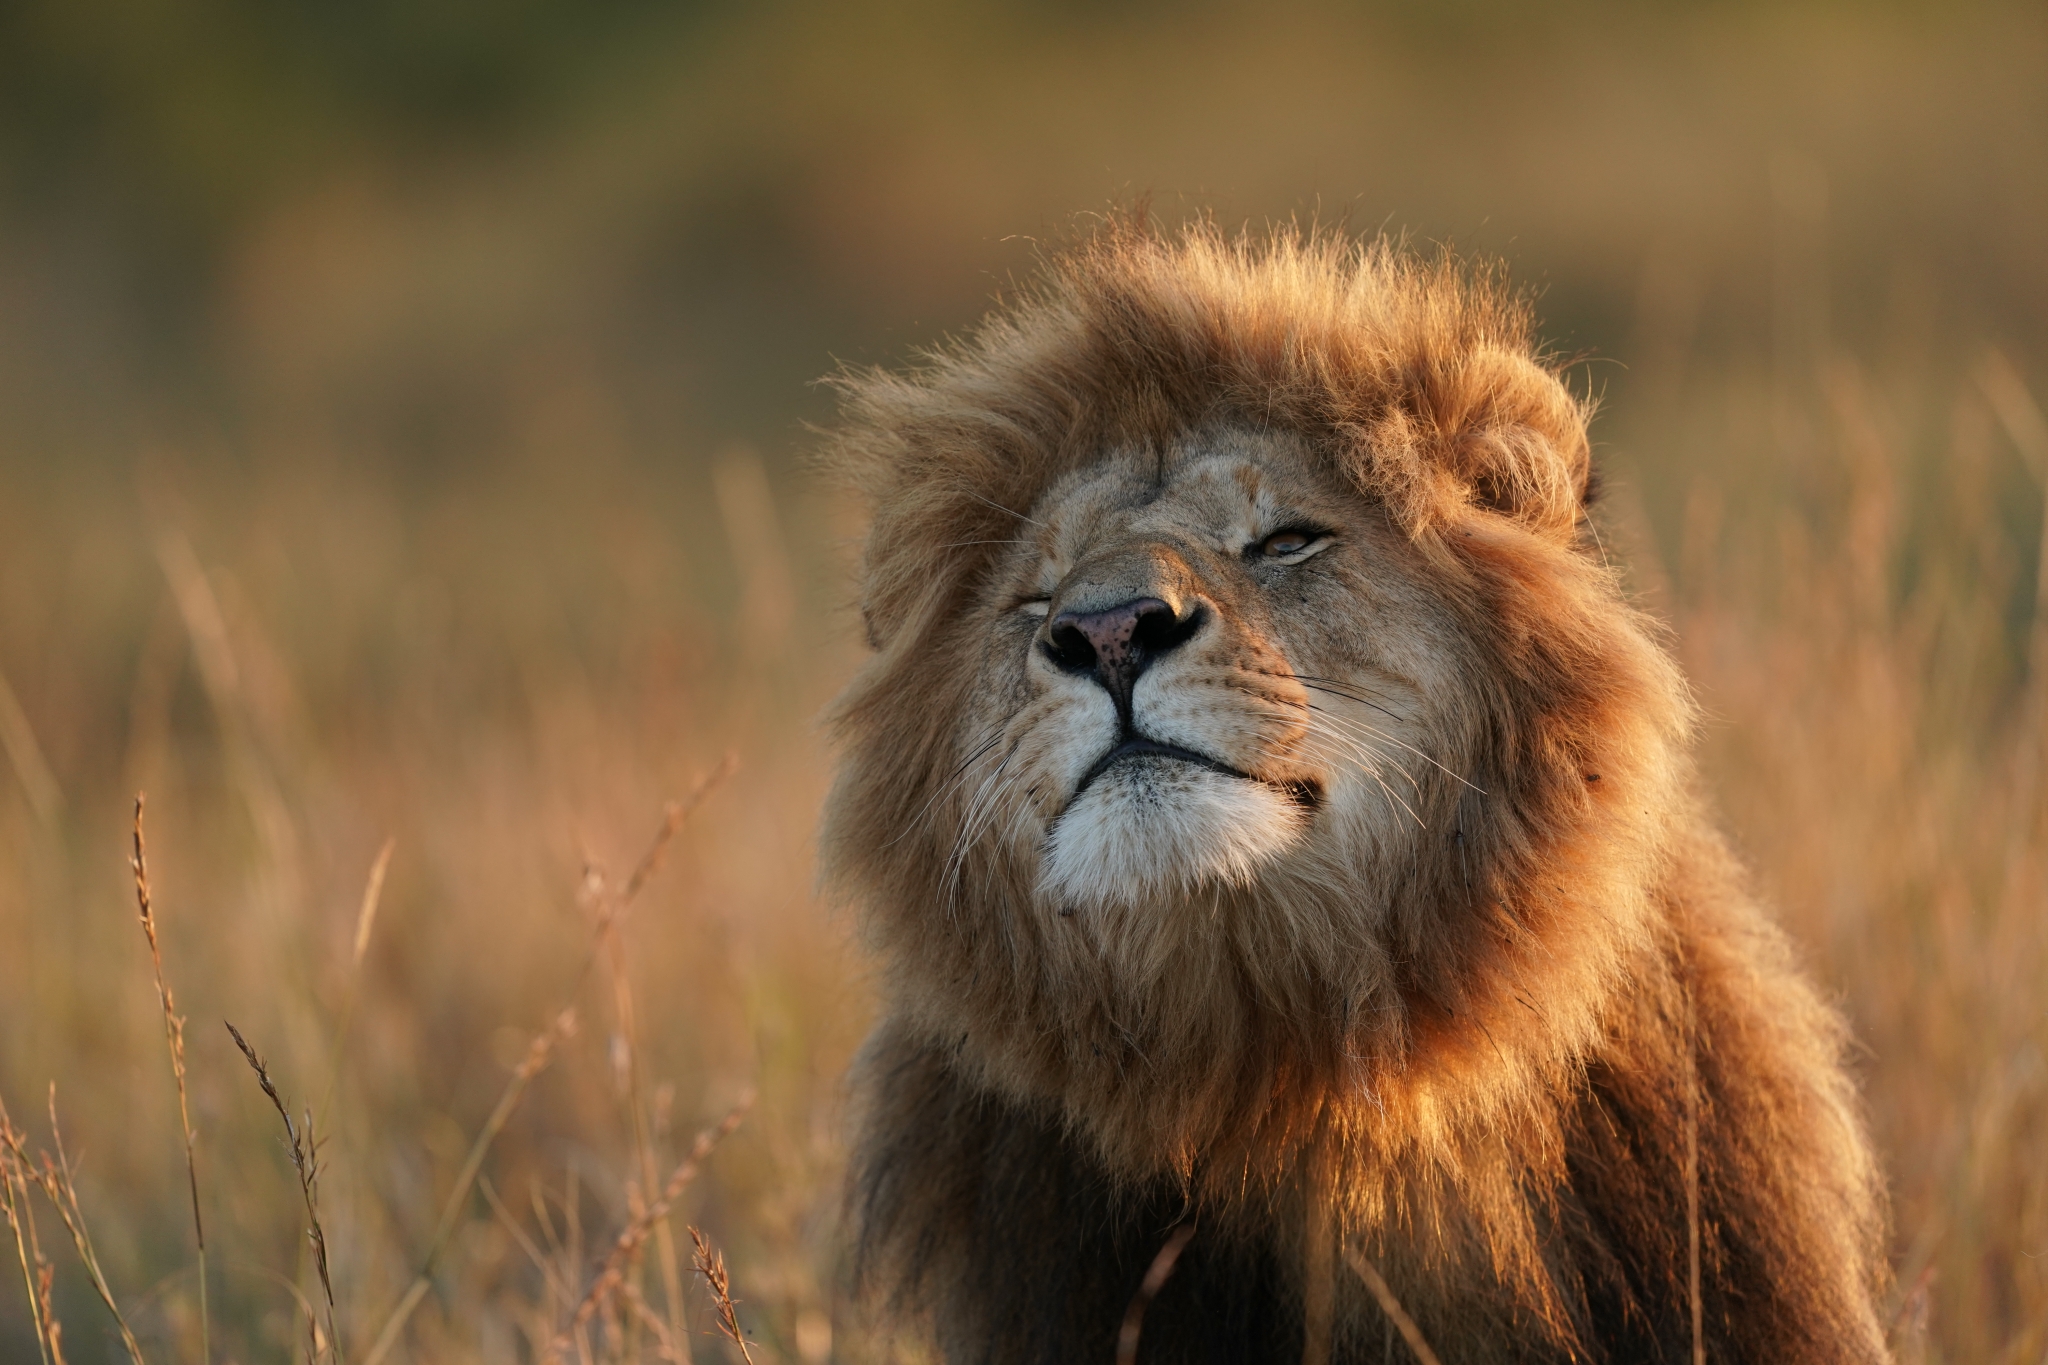 Portrait of a lion among grass in bokeh background